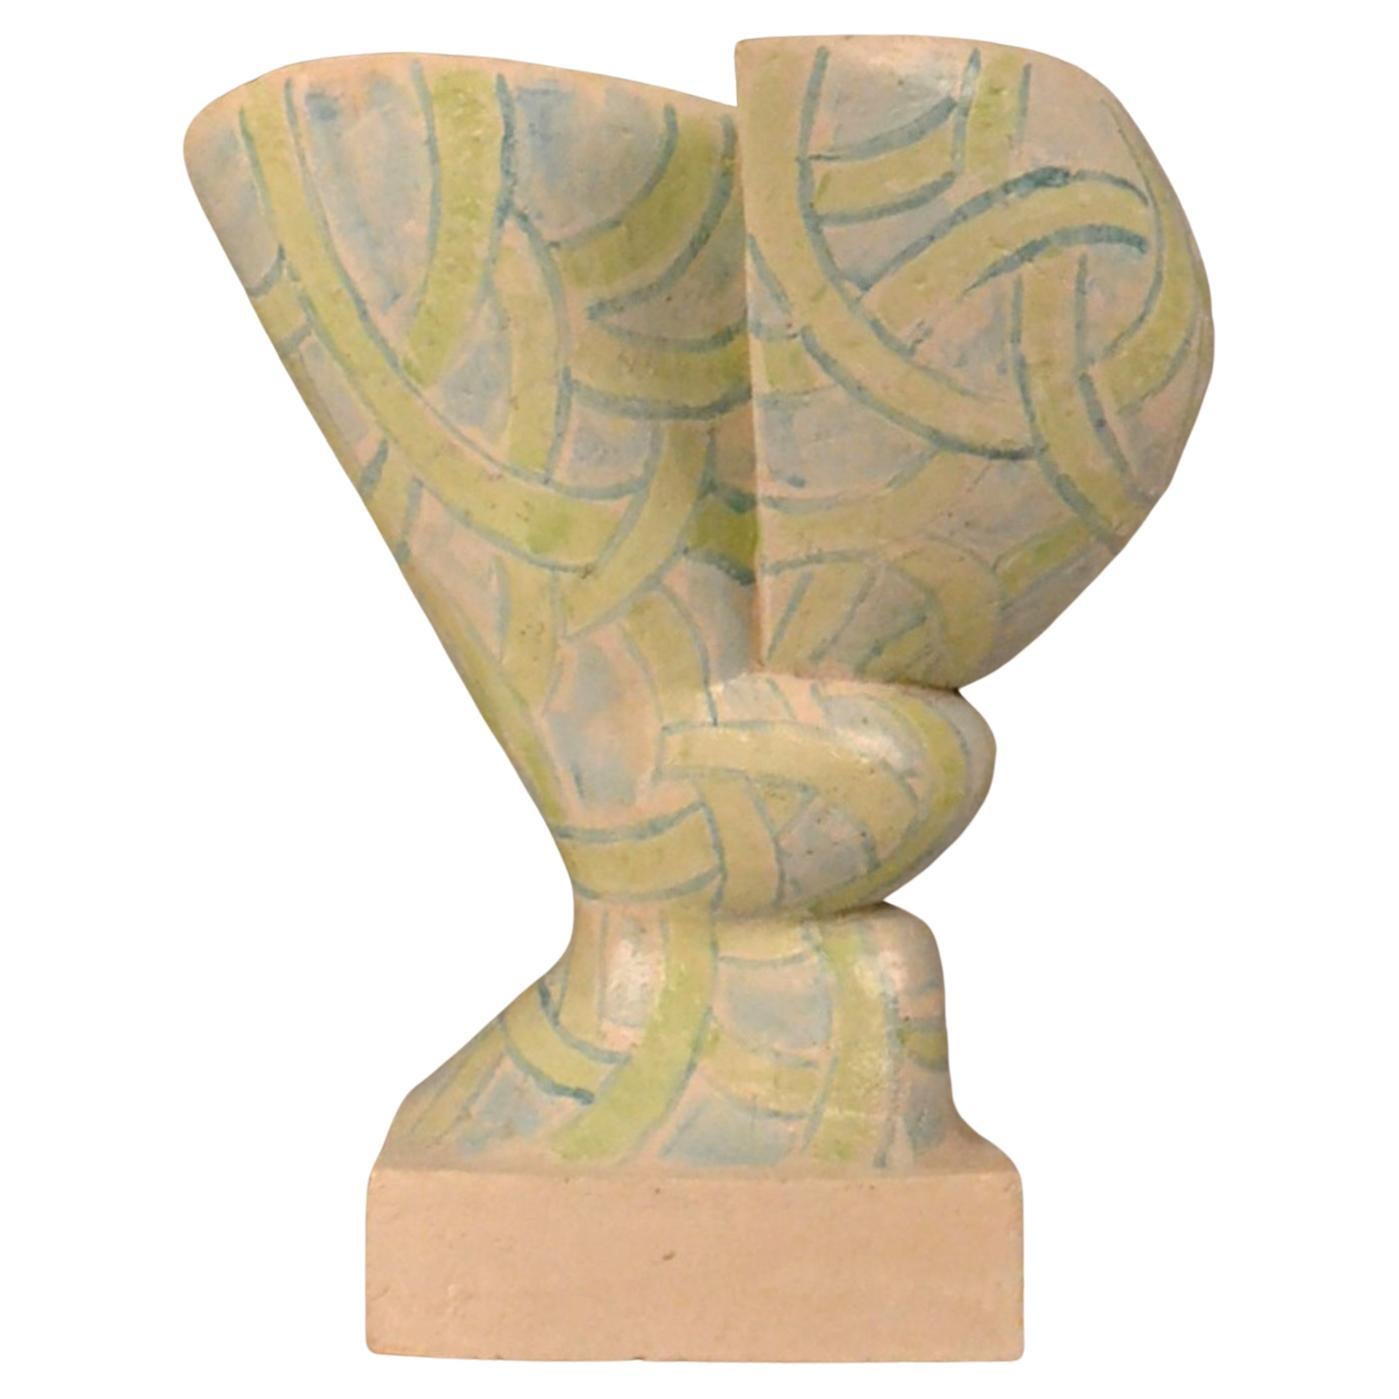 Sculptural  Vessel with Light Green and Blue Patern by W. Schalling, Netherlands